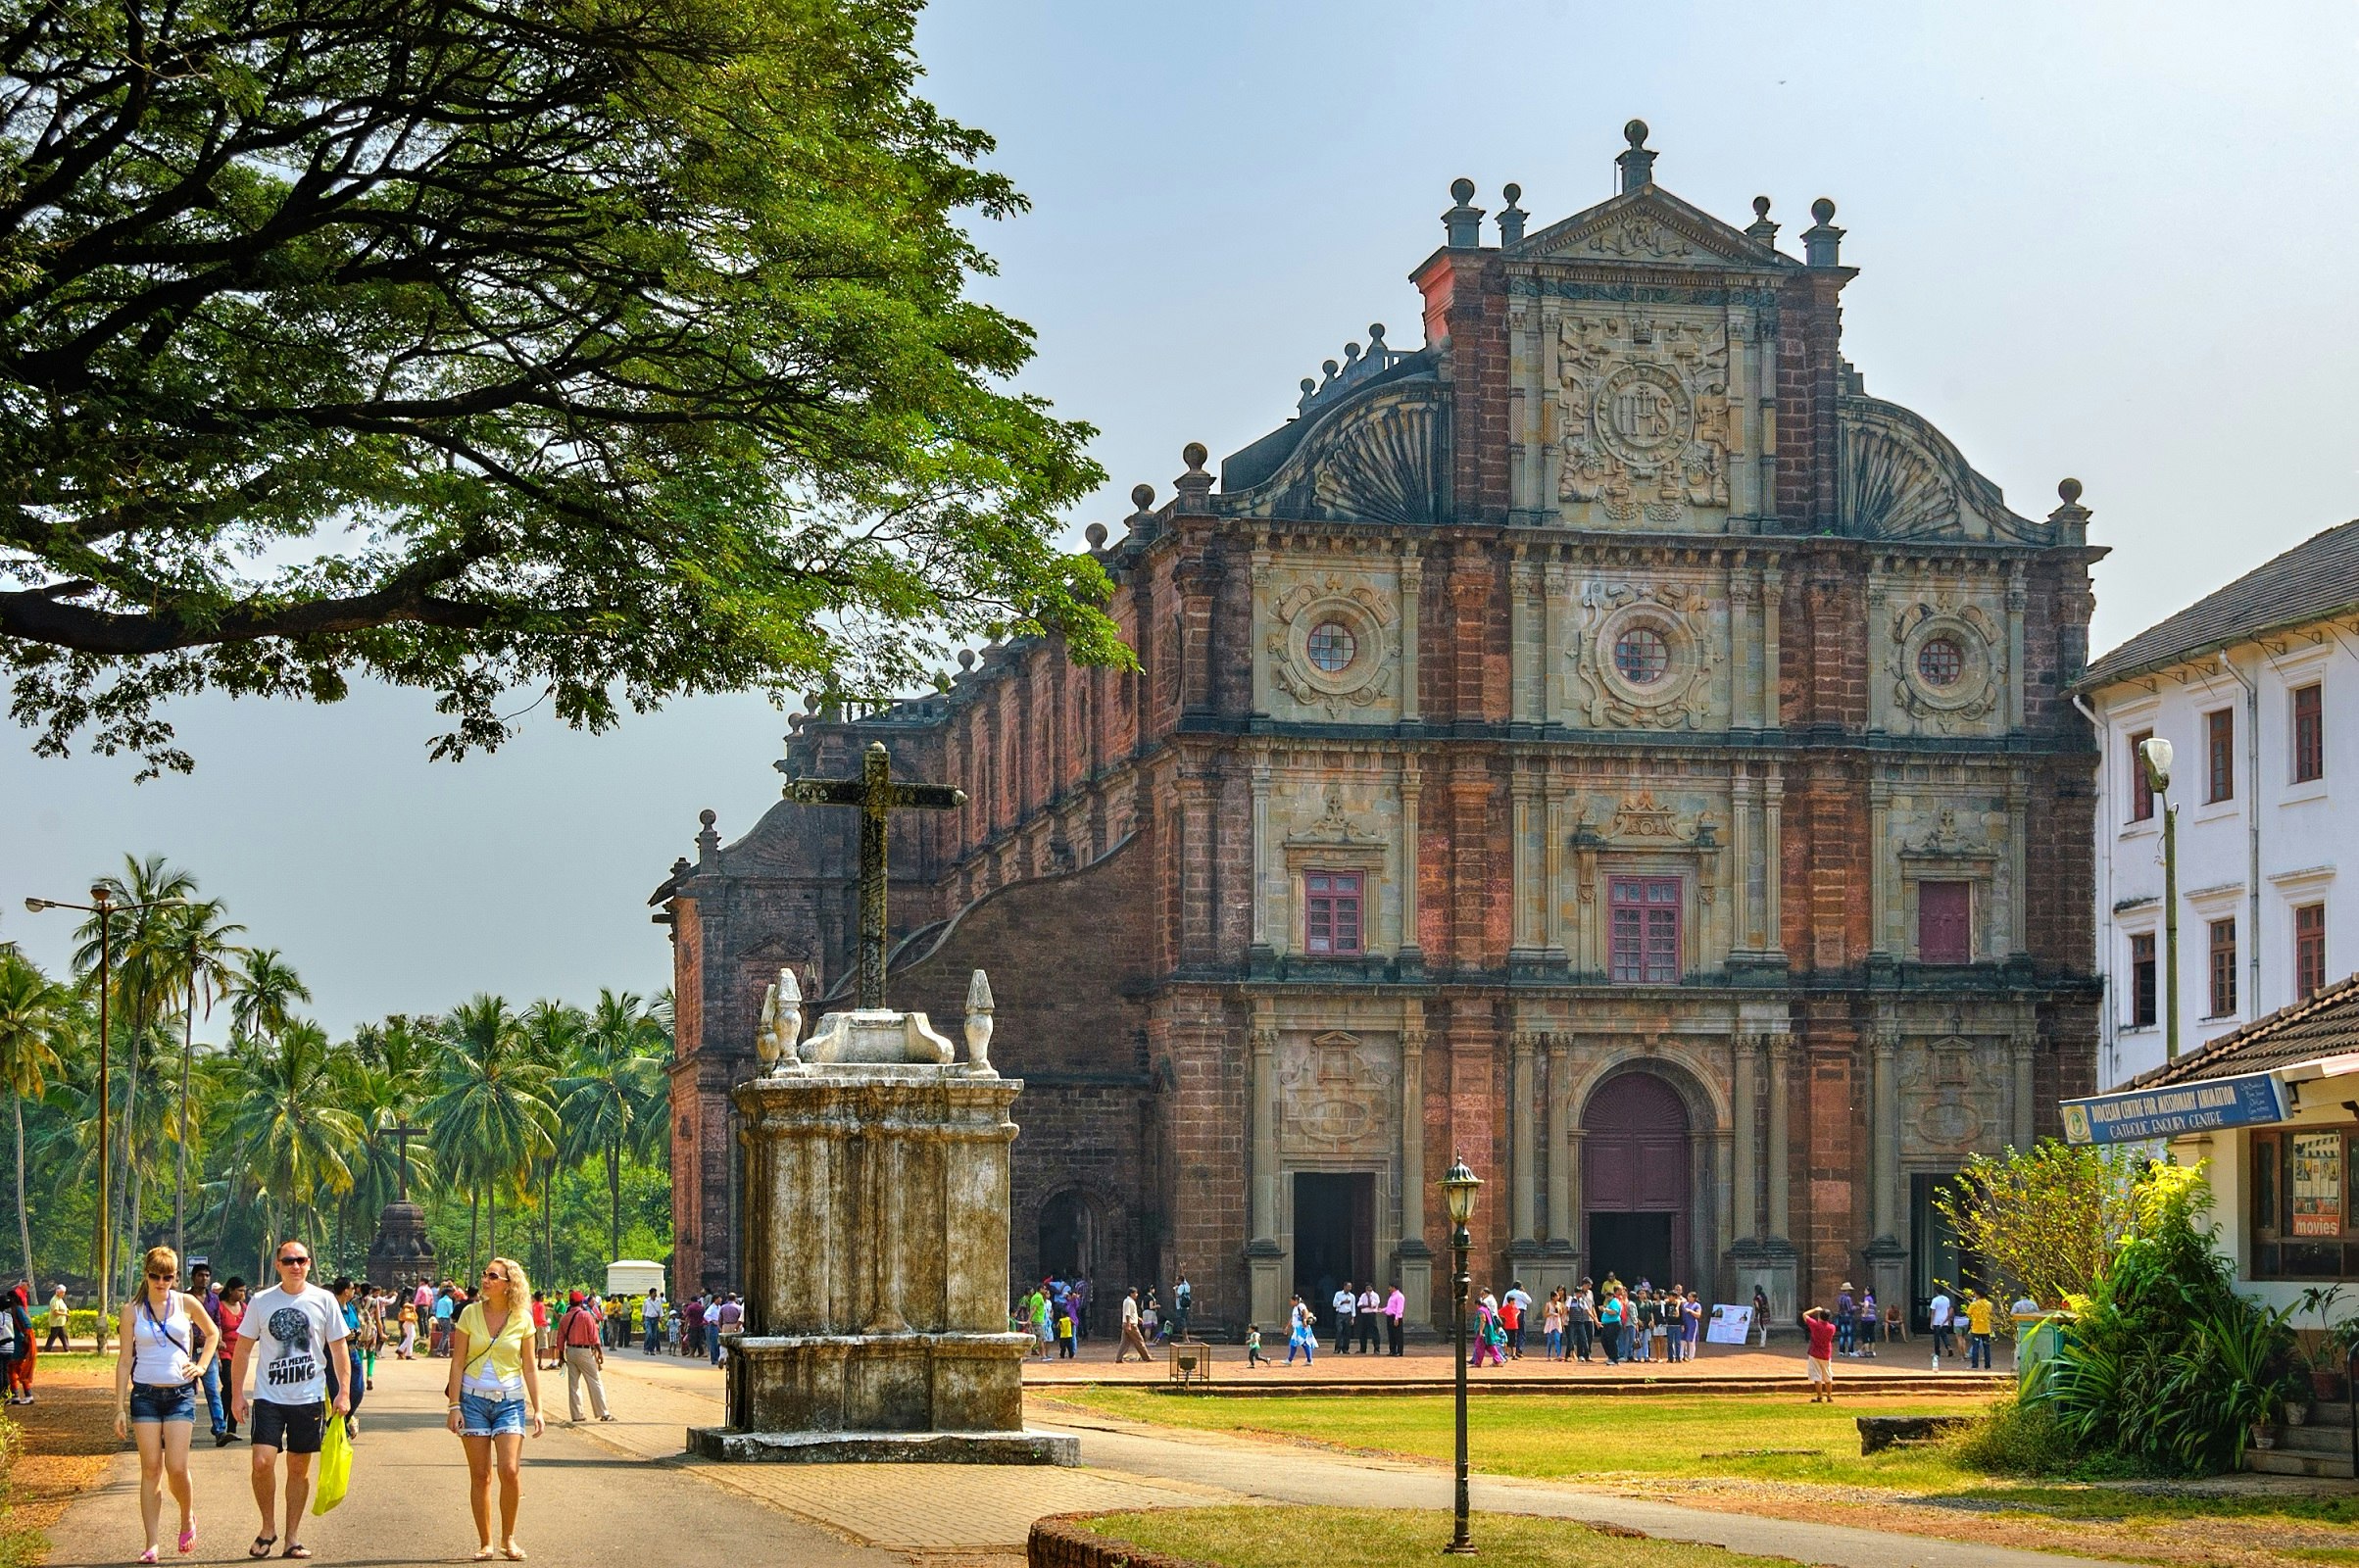 An imposing Portuguese church located in Old Goa, looming over the surrounding palm trees and scattering of people walking around the grounds.